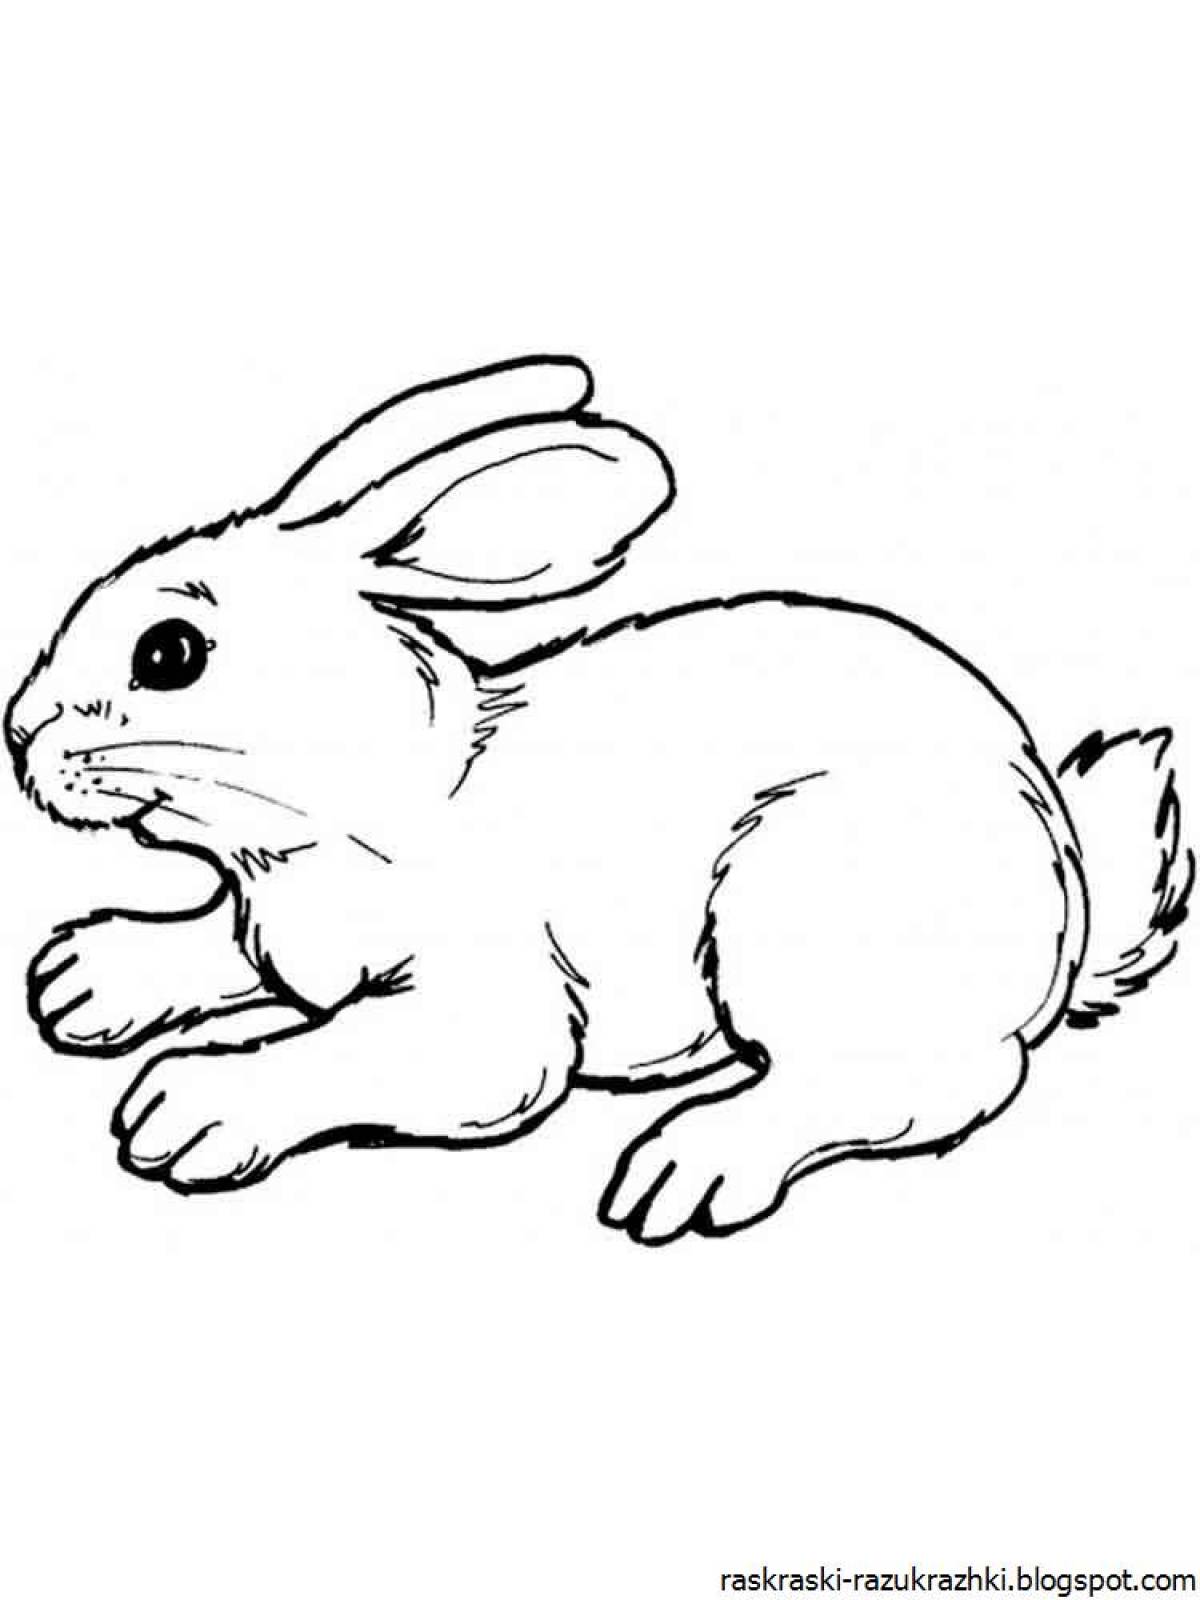 Colorful bunny coloring picture